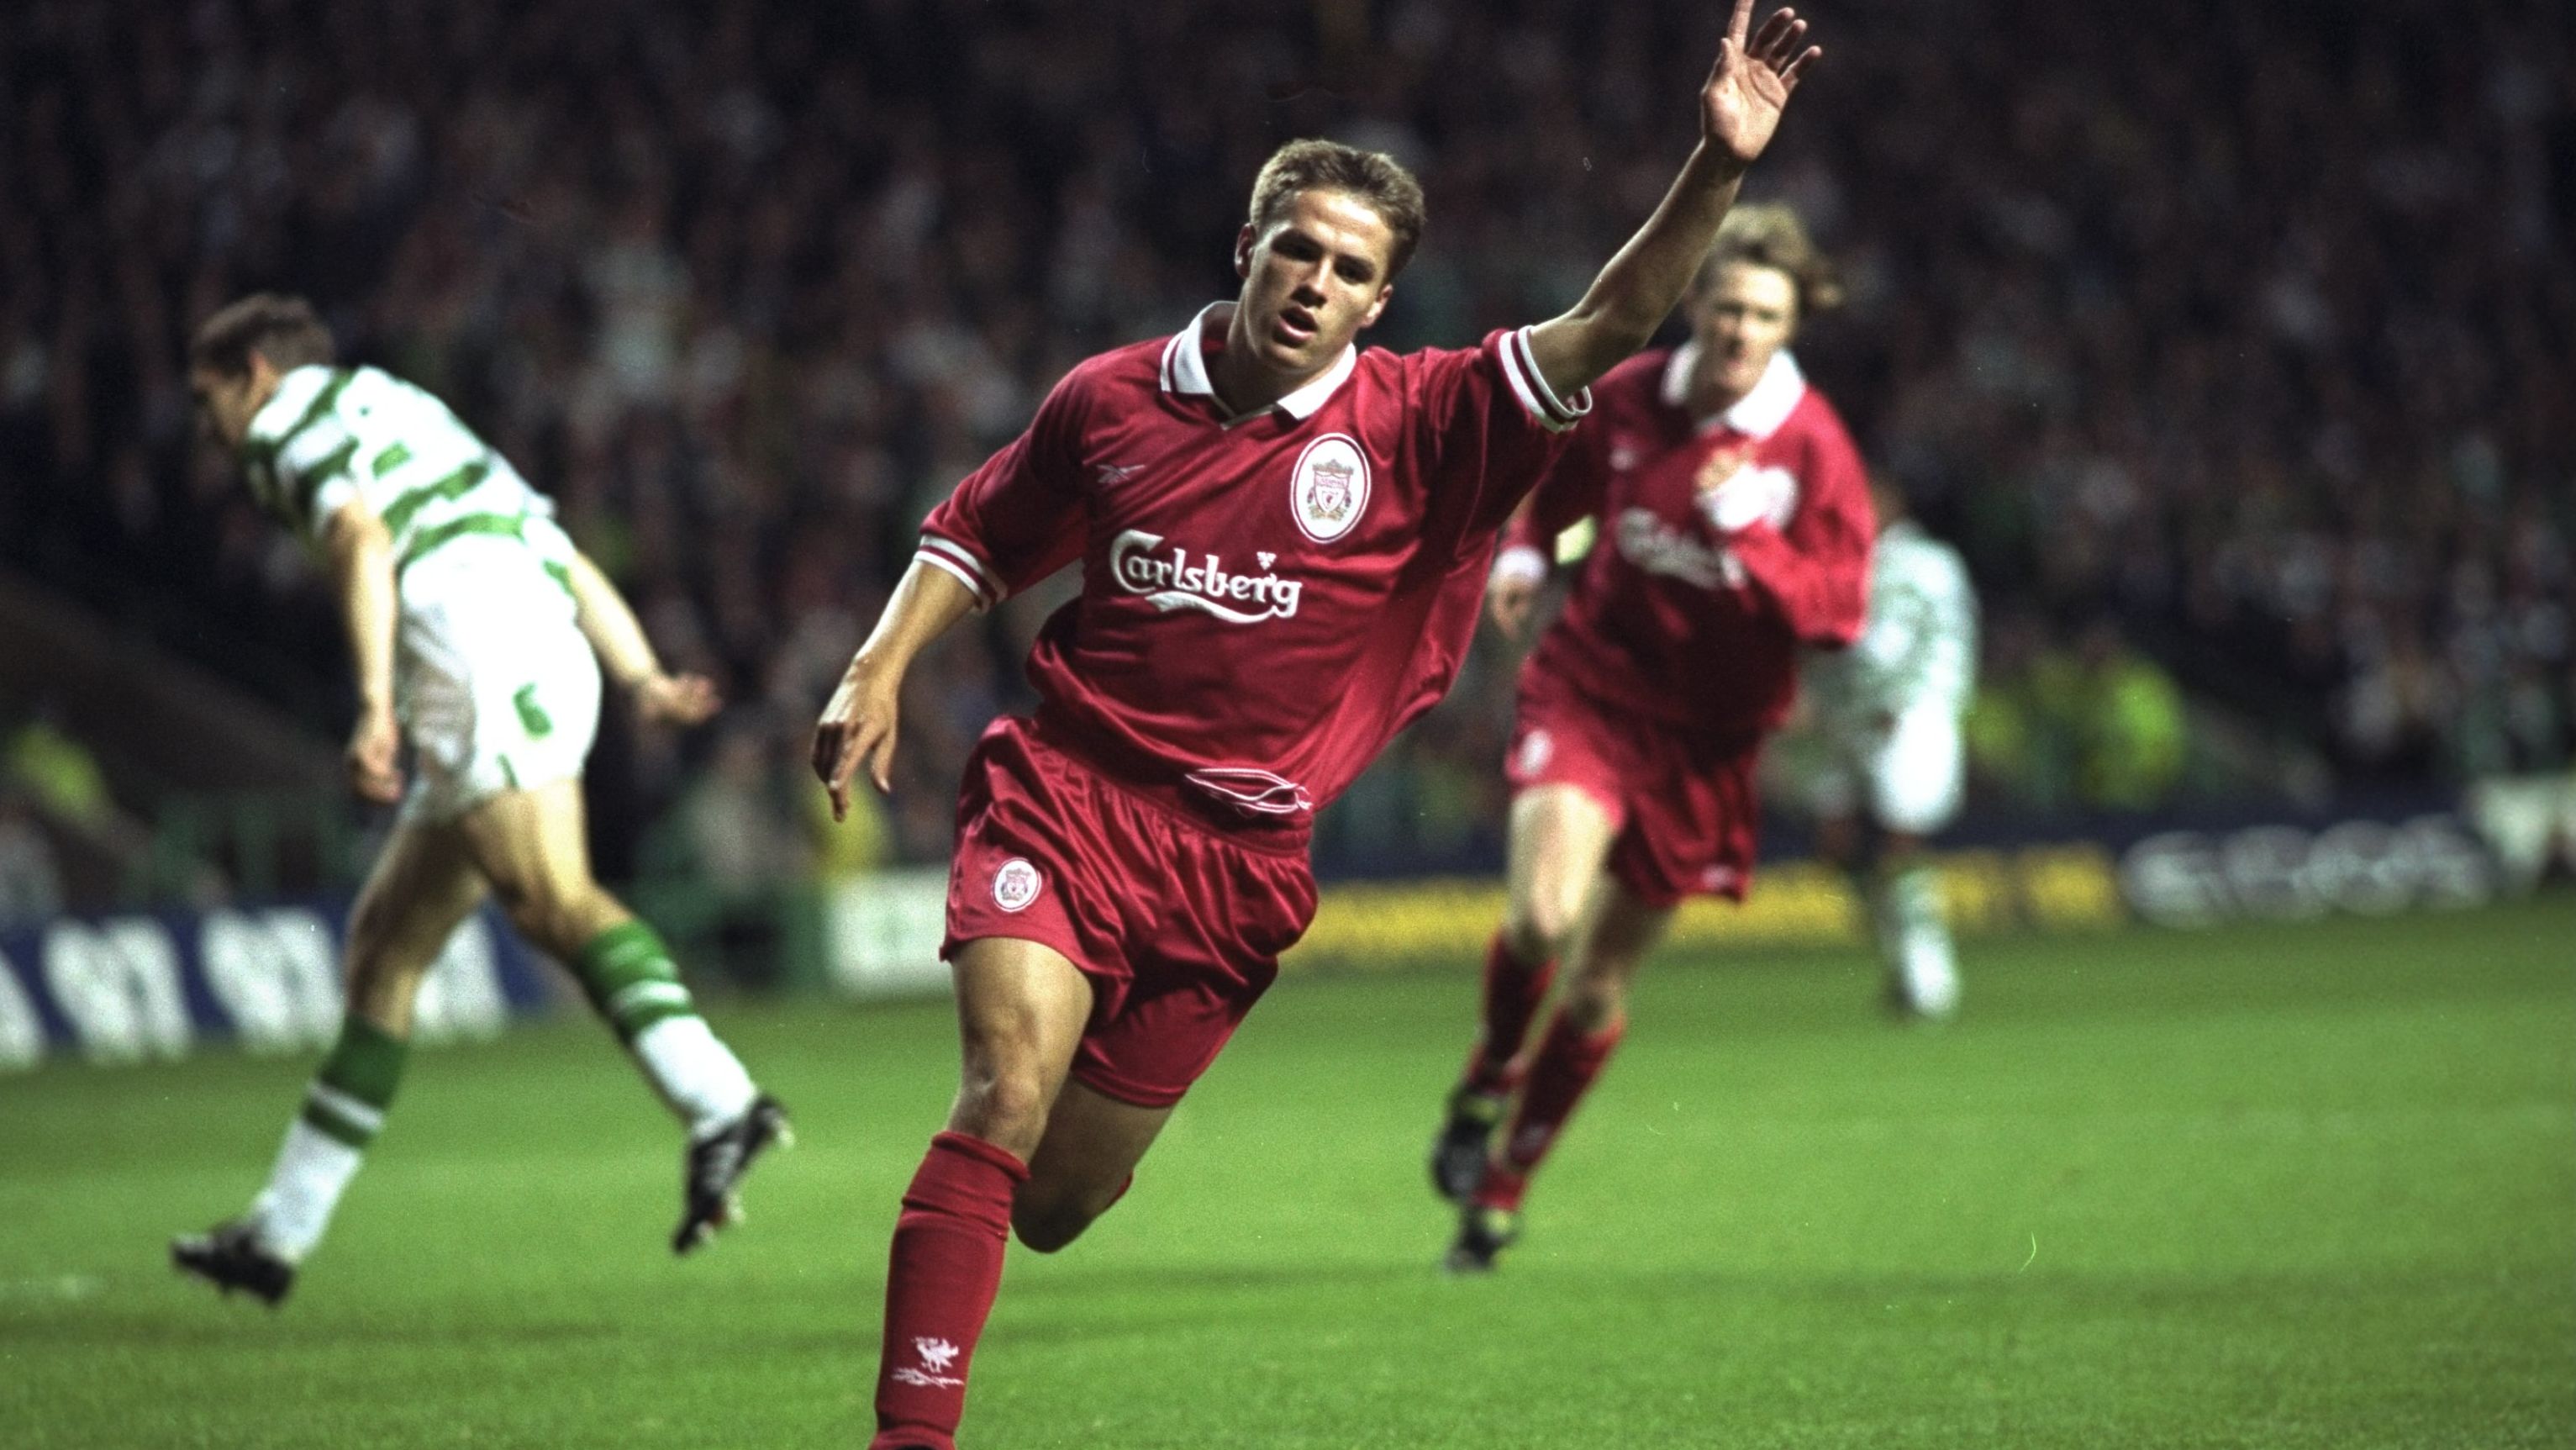 Michael Owen is one of Liverpool's most successful graduates, playing at the 1998 World Cup when 18.